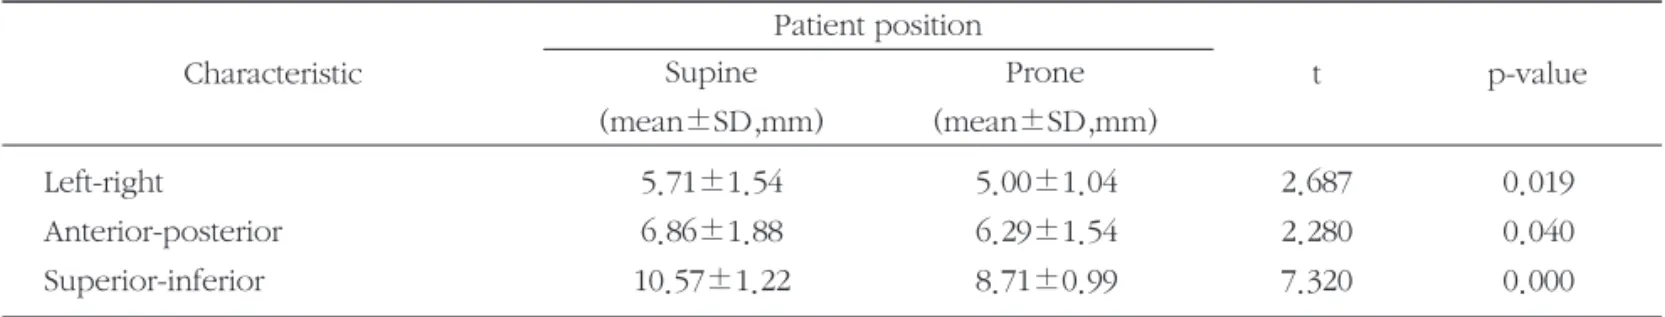 Table 4. Comparison of the volume in the supine and prone positions Patient position Supine (mean±SD,cm 3 ) Prone (mean±SD,cm 3 )Characteristic CTV PTV Normal Liver 187.12±210.84279.48±253.59 1003.30±212.32 187.00±210.26251.51±230.86 1033.29±196.71 0.2723.